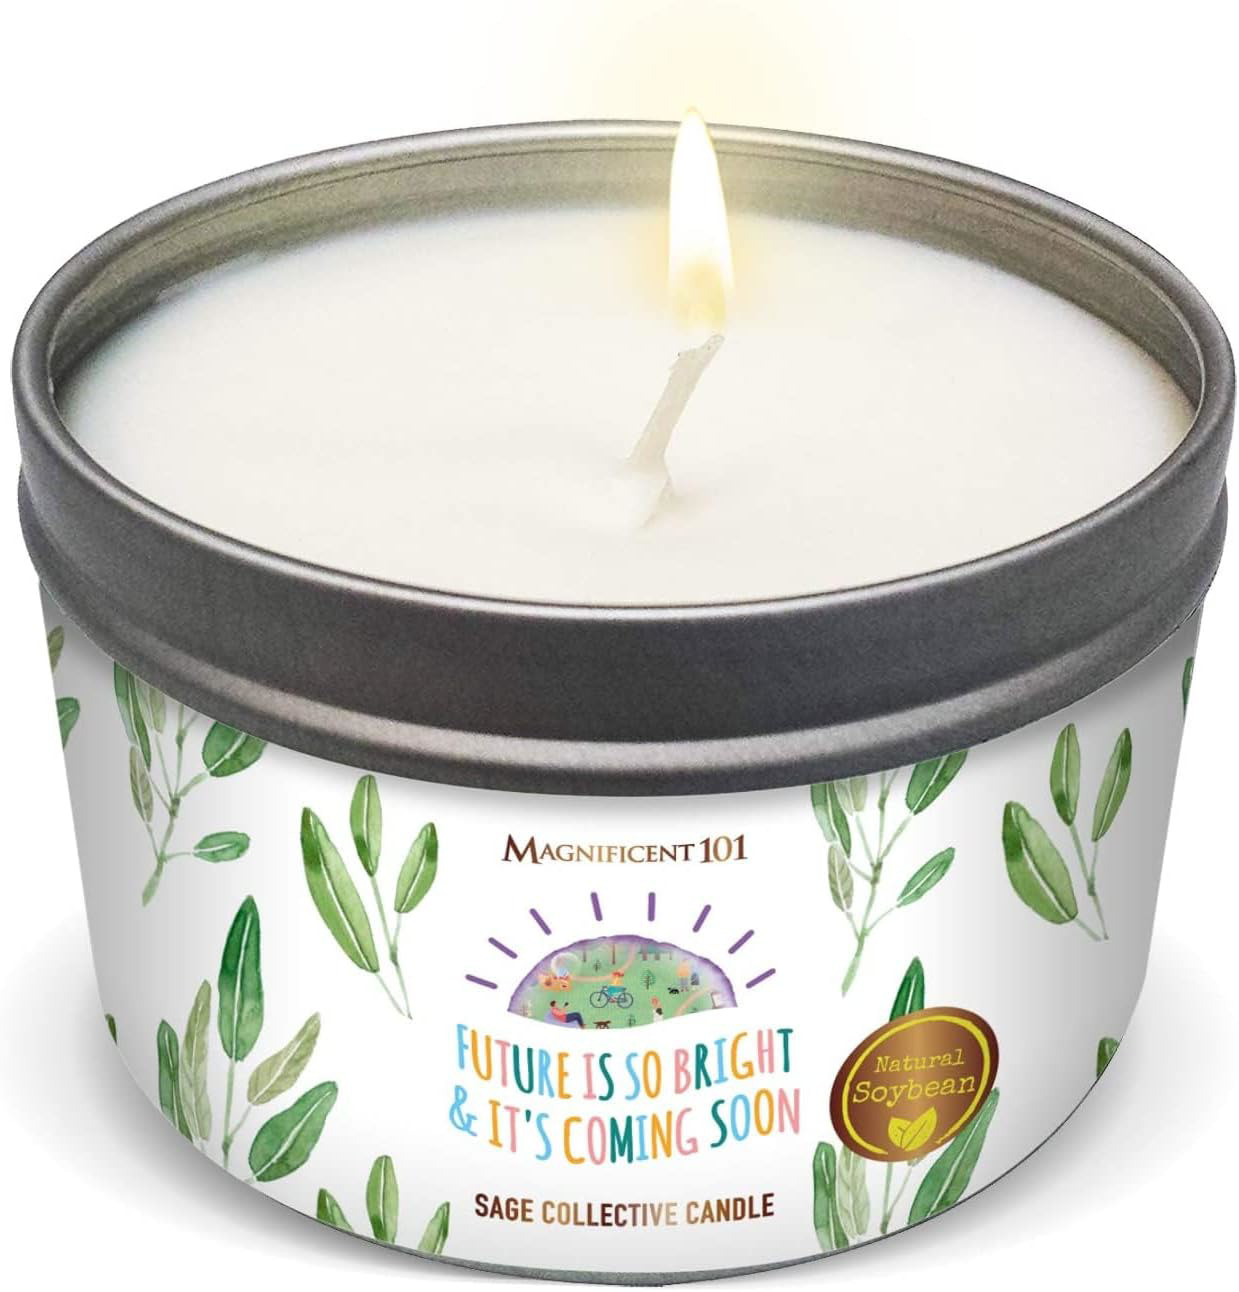 MAGNIFICENT101 Pure White Sage Collective Candle Smudge Candle for House Energy